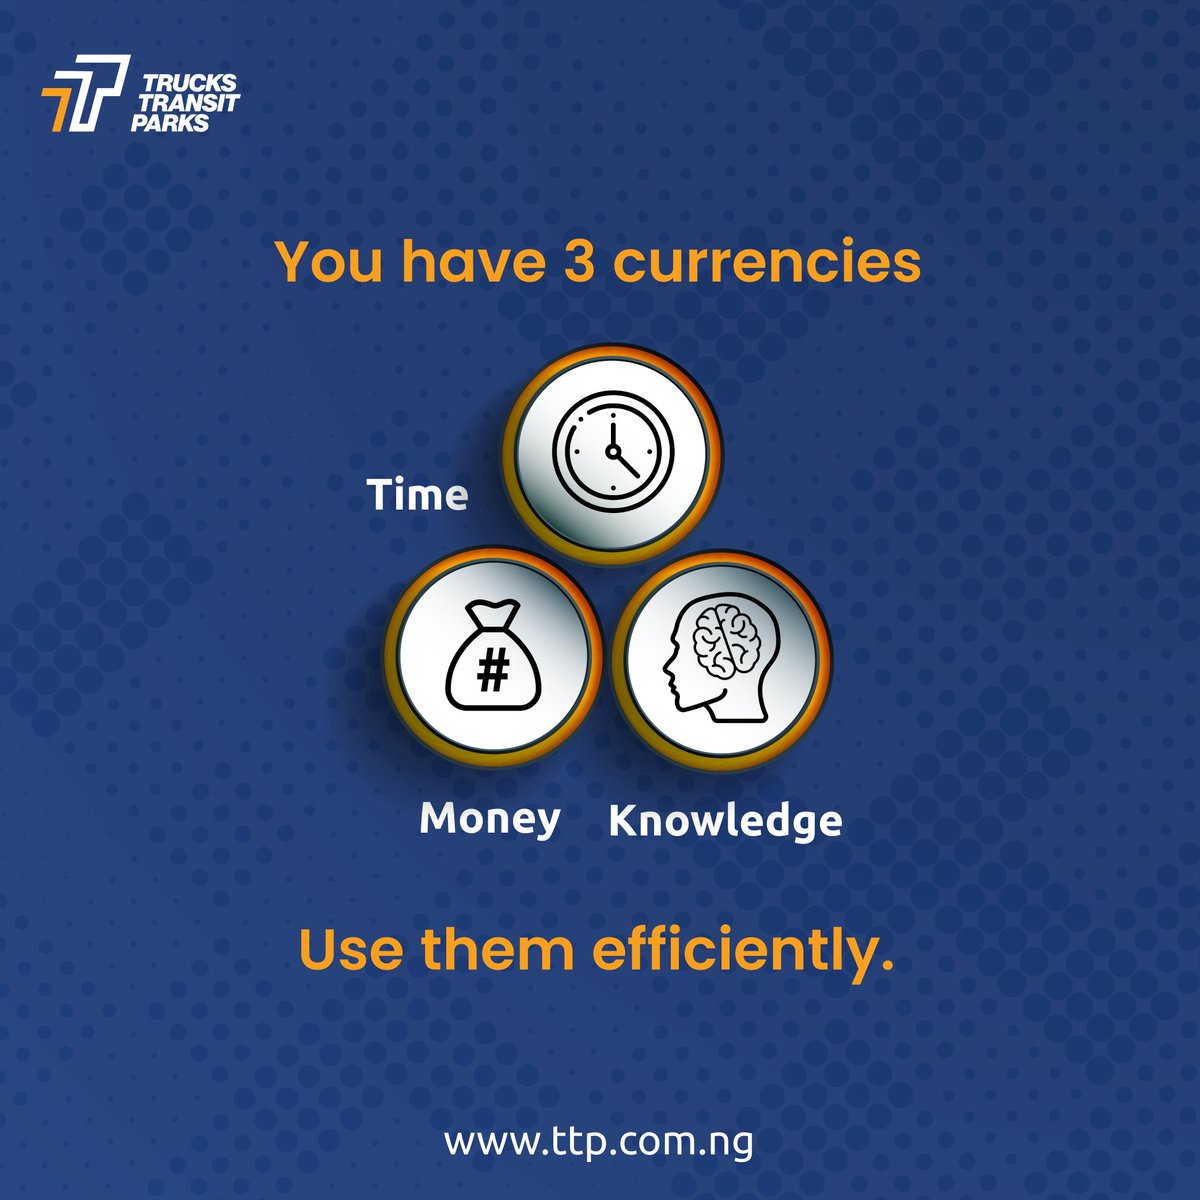 Monday mindset: Make the most of your time, money, and knowledge by utilizing them efficiently towards your goals. 

#ttp #MondayMotivation #EfficiencyFirst #InvestInYou